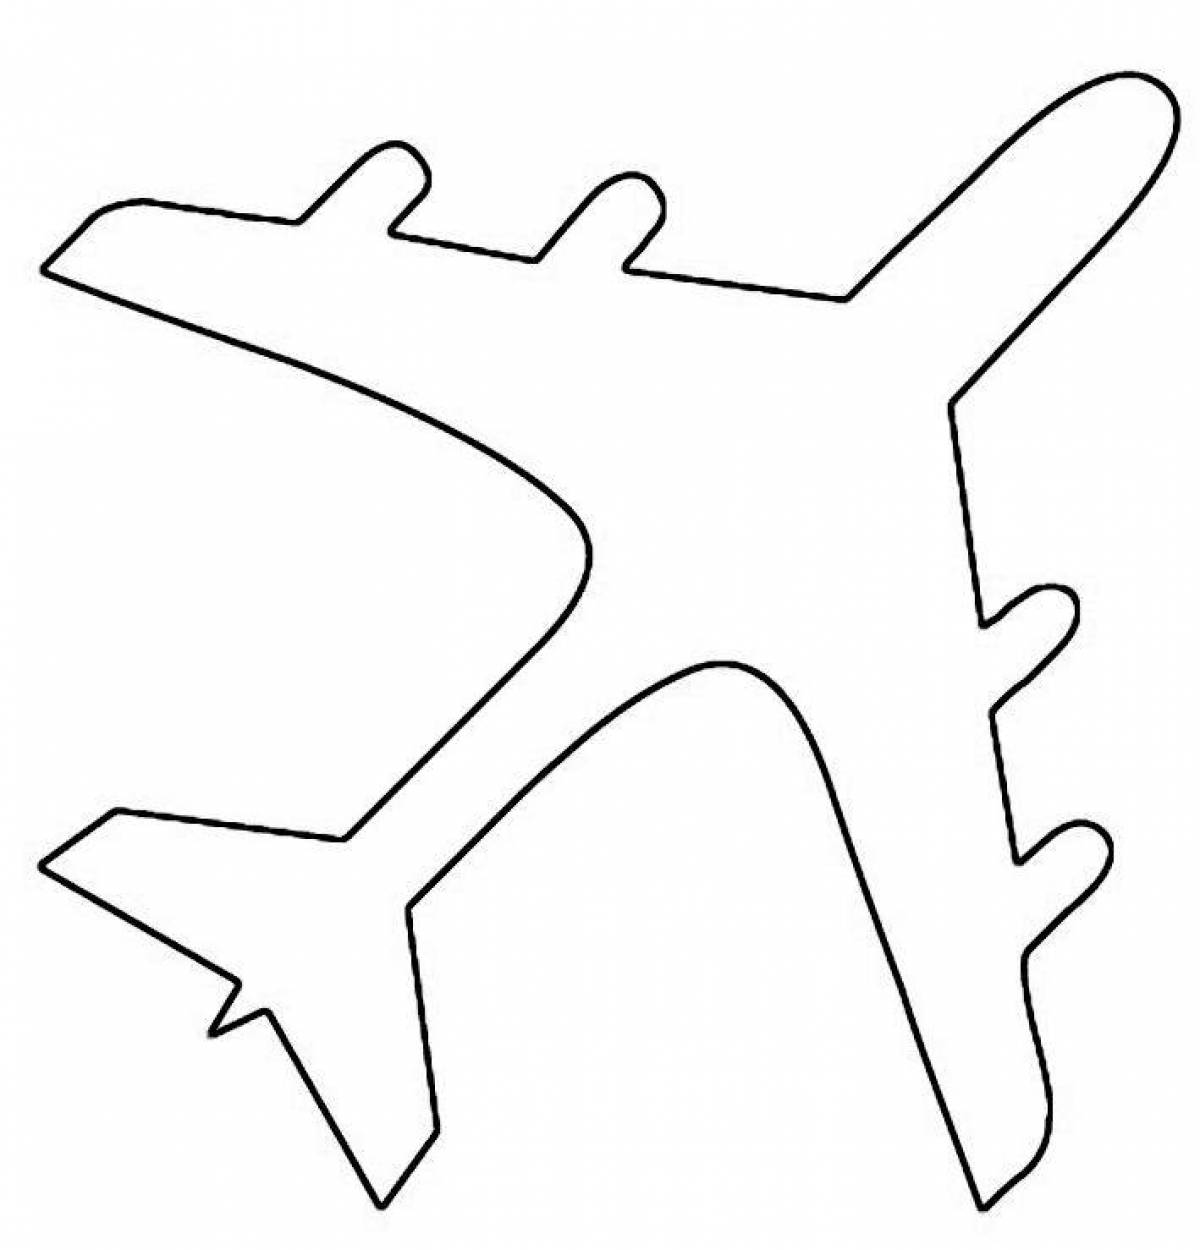 Festive Airplane coloring page